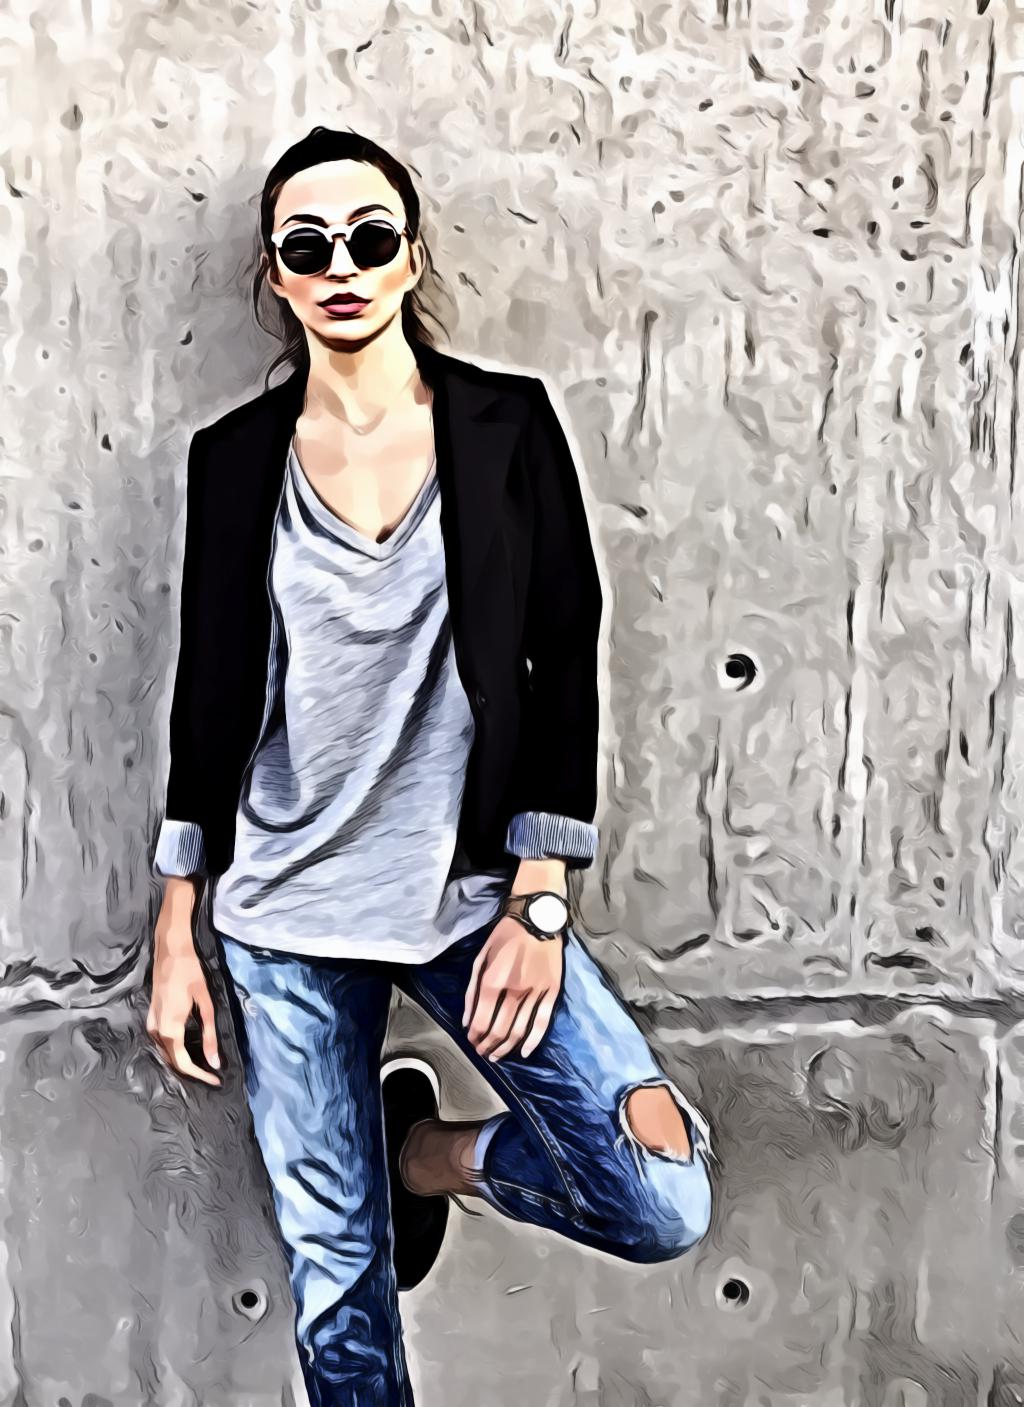 Woman Wearing Sunglasses Leaning on Concrete Wall With Left Toe on Wall